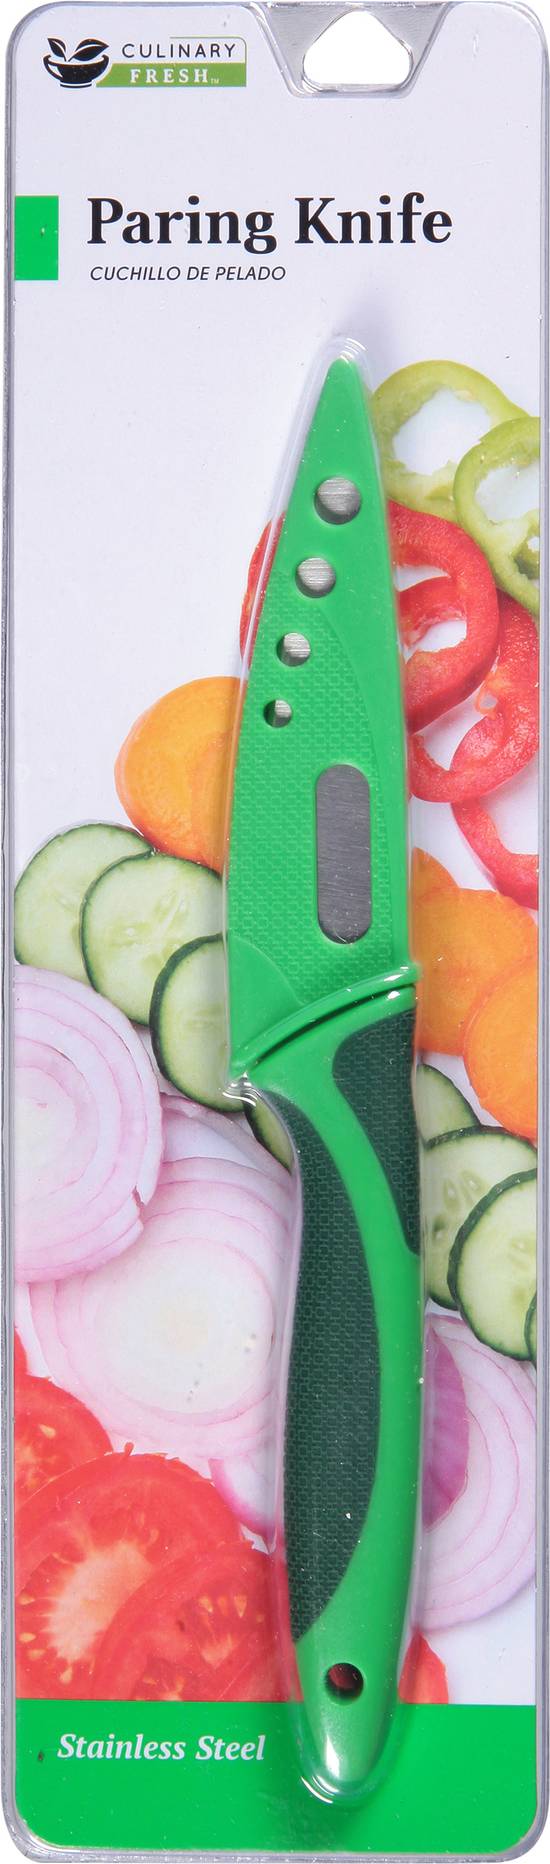 Culinary Elements Stainless Steel Paring Knife (1 ct)